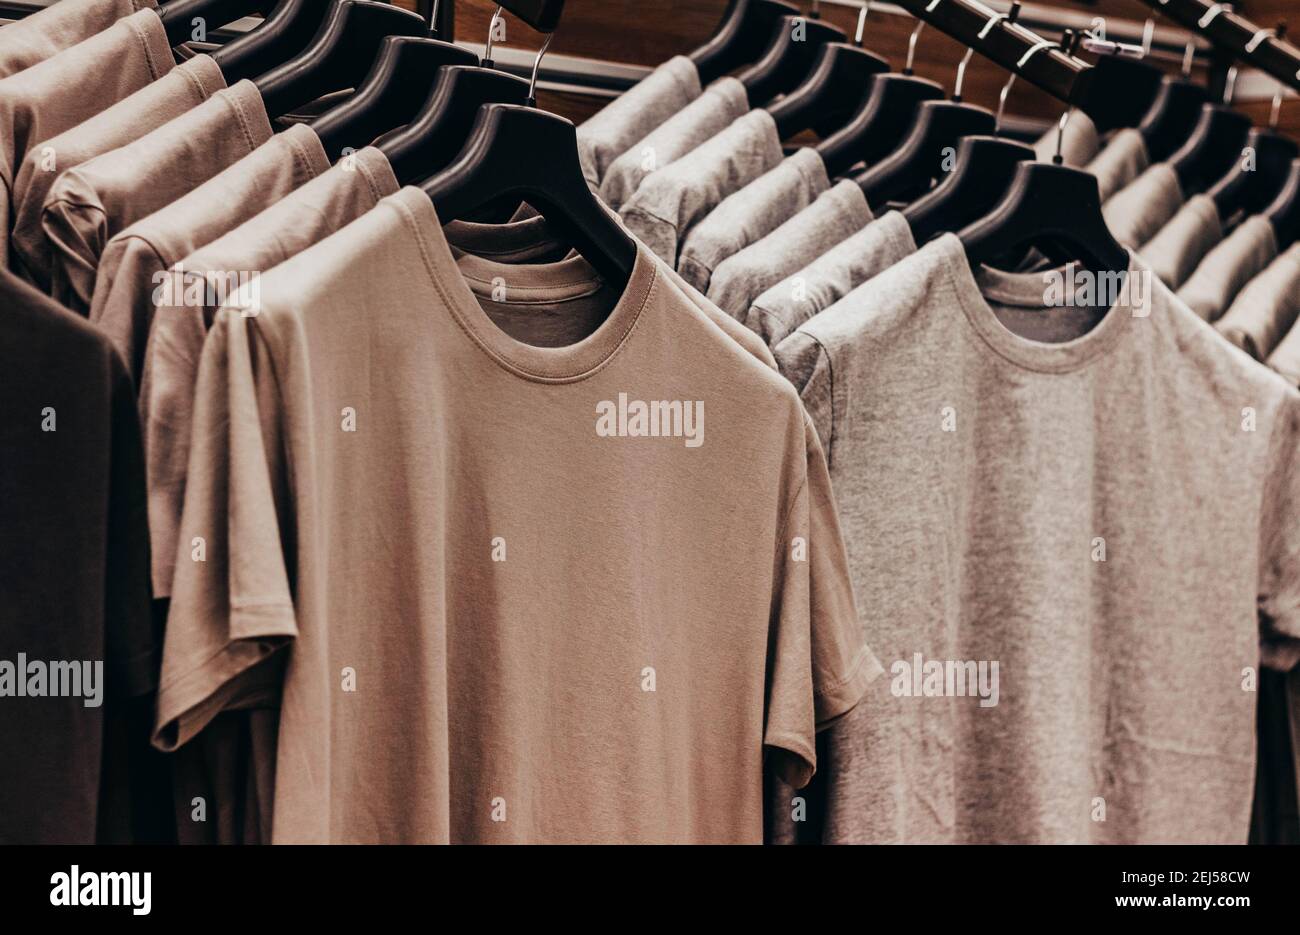 Close-up photo of olive colored soldier tactical t-shirts hanging on stand rack. Stock Photo